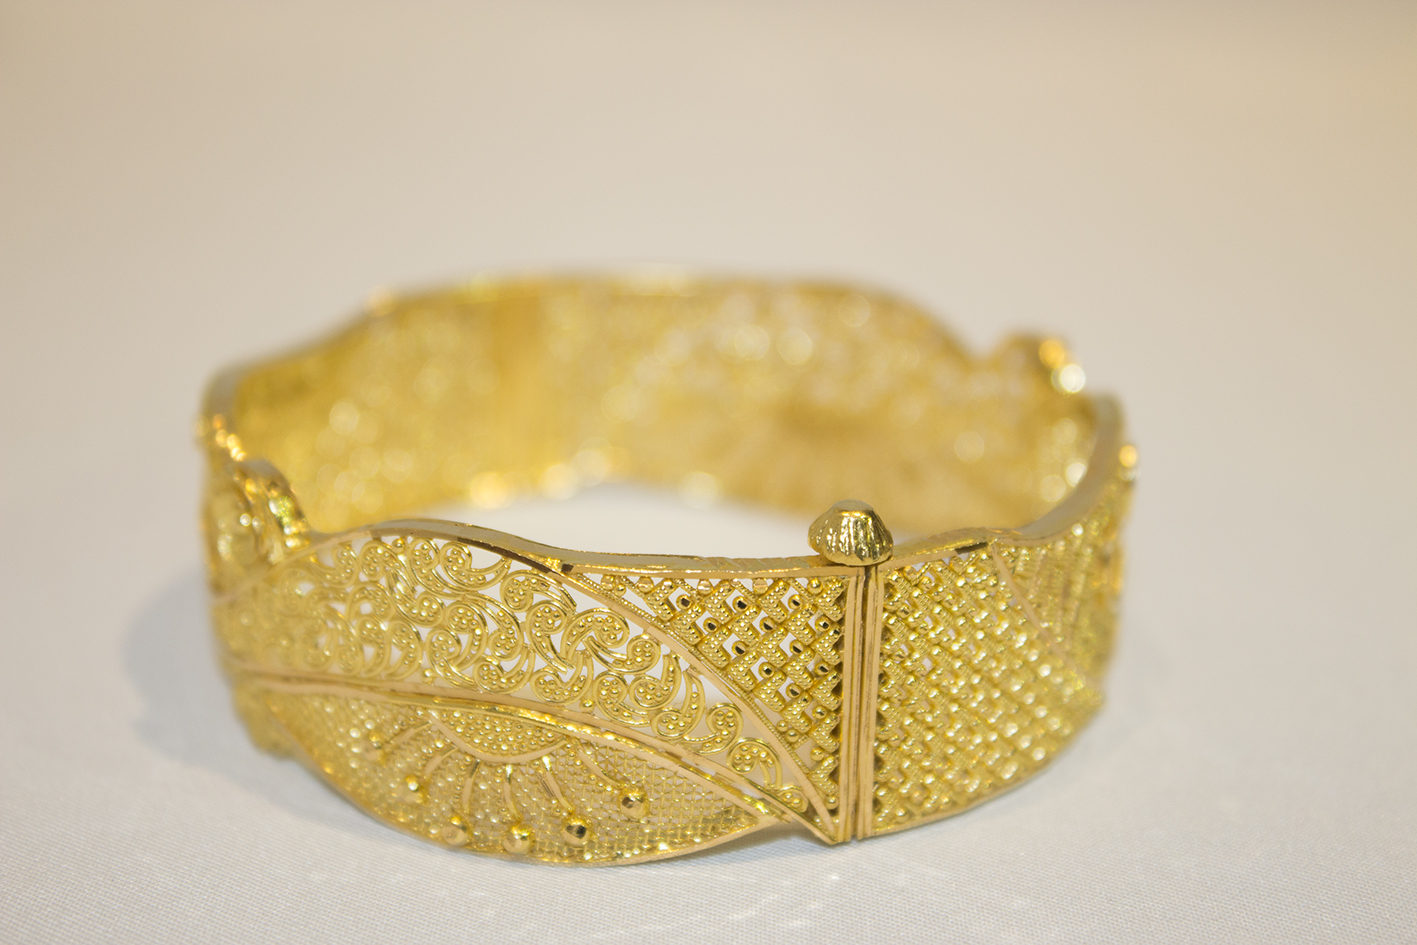 22ct Gold Bangles With Intricate Filigree Cut Design